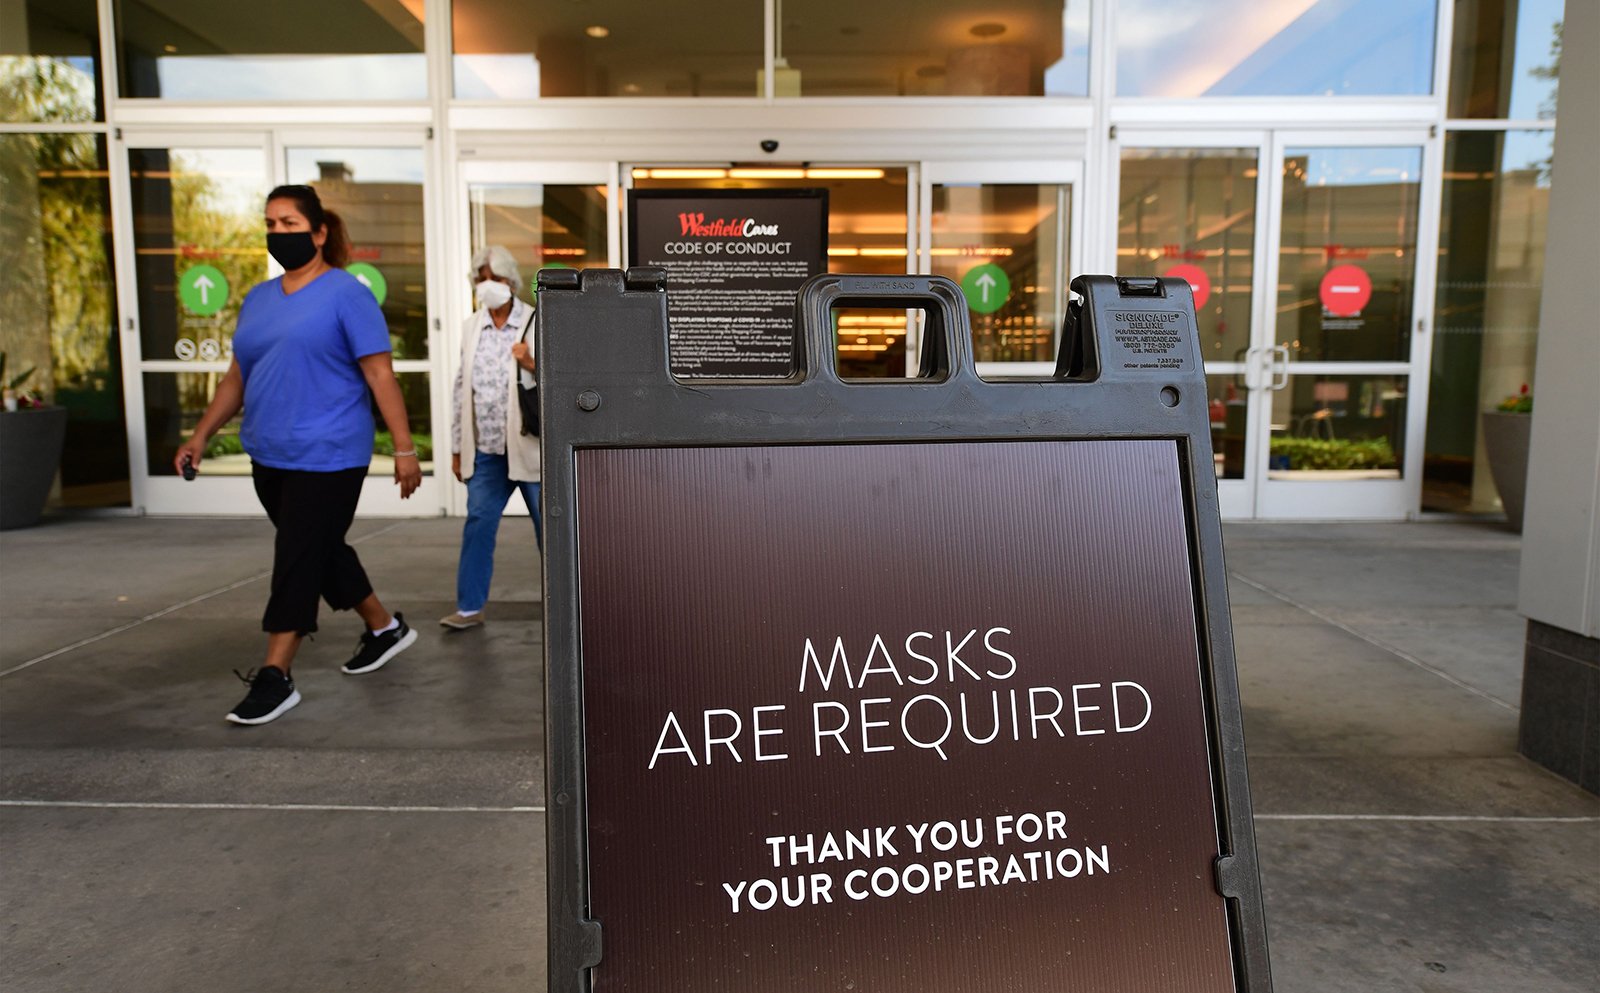 Women wearing face masks exit a shopping mall where a sign is posted at an entrance reminding people of the mask requirement Westfield Santa Anita shopping mall in Arcadia, California, on June 12.